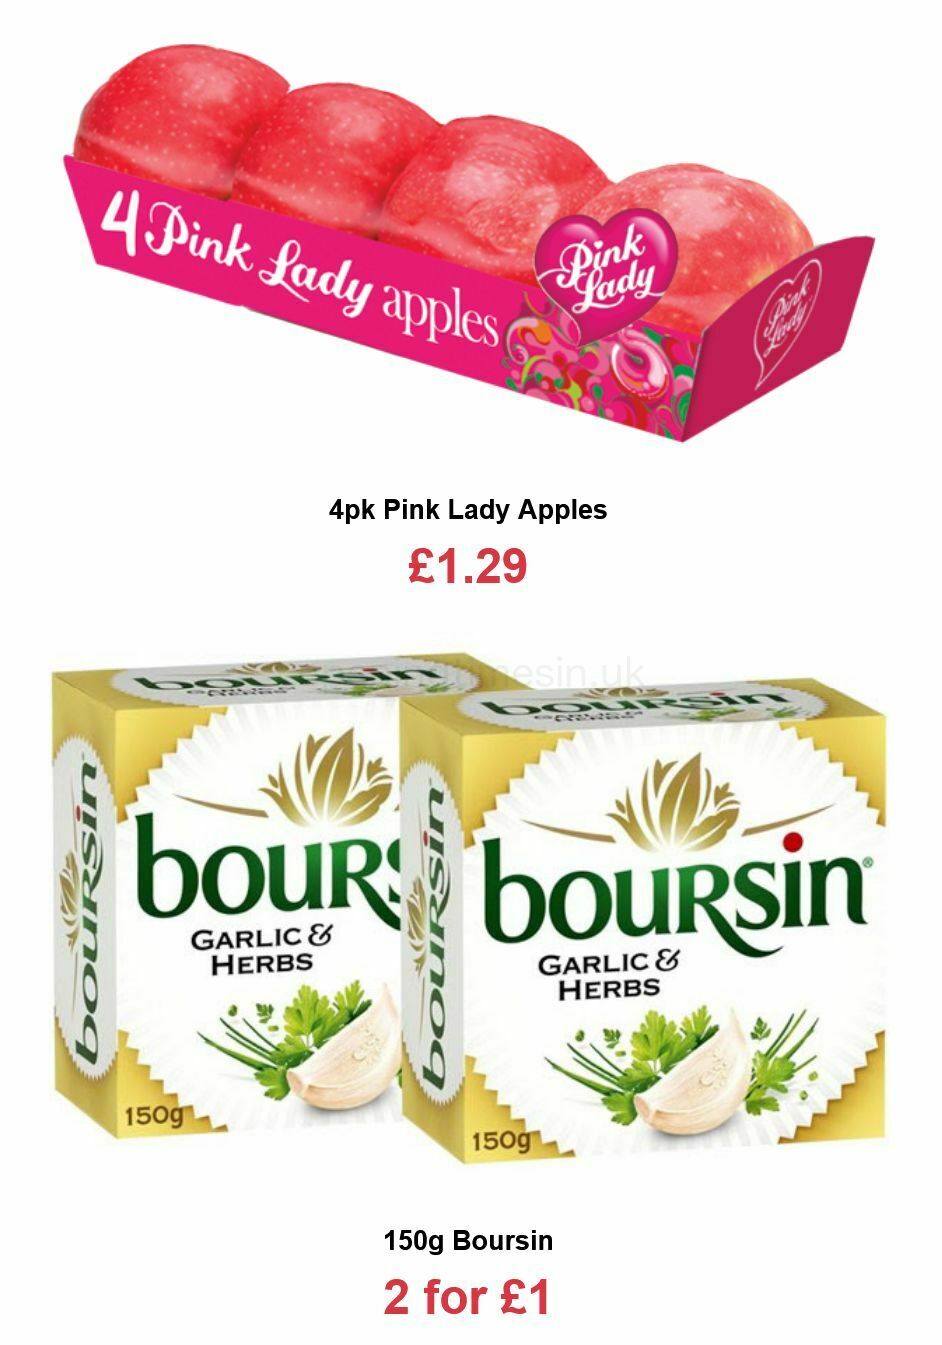 Farmfoods Offers from 12 July